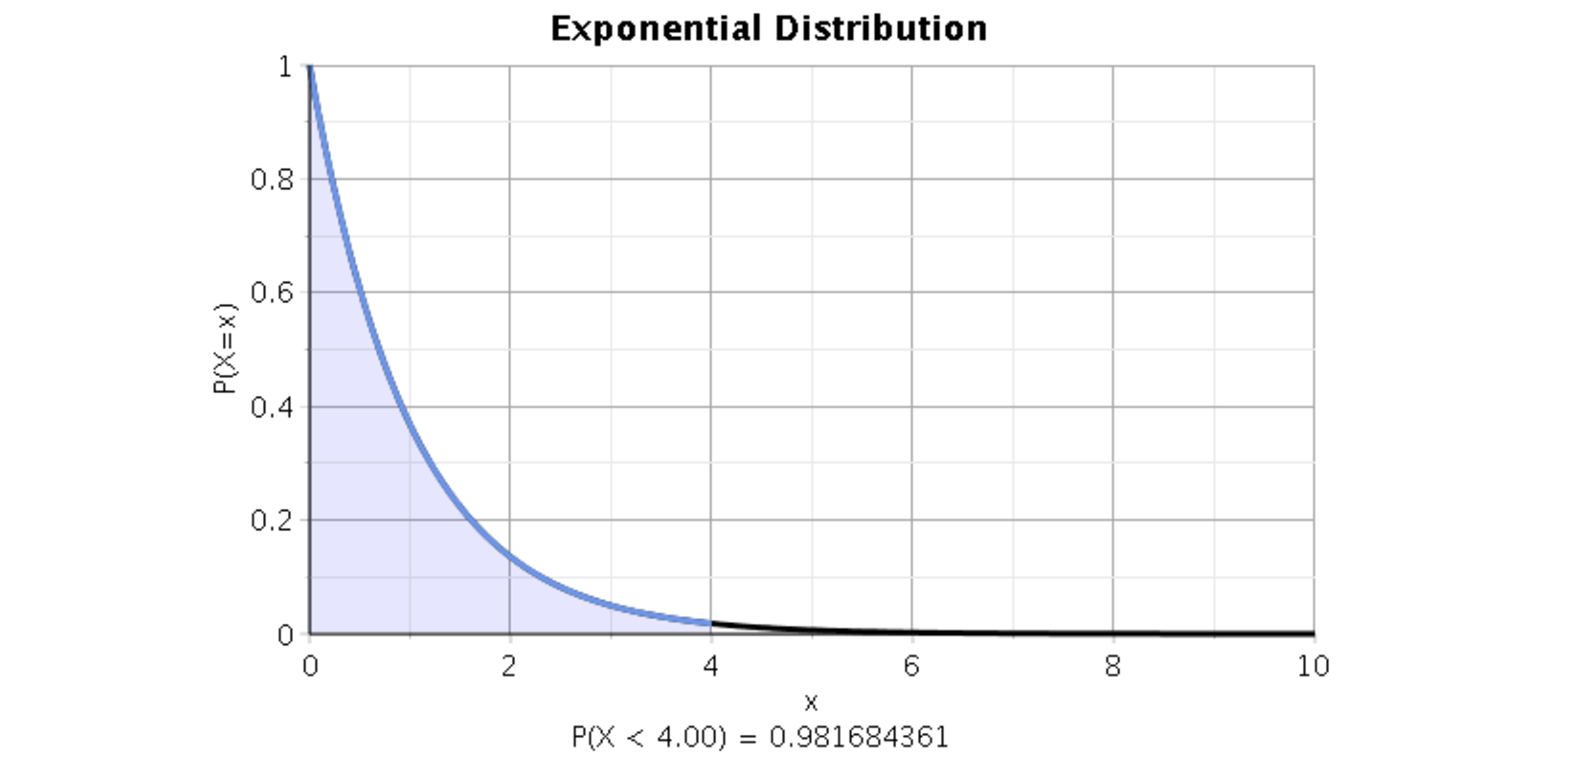  Exponential Distribution